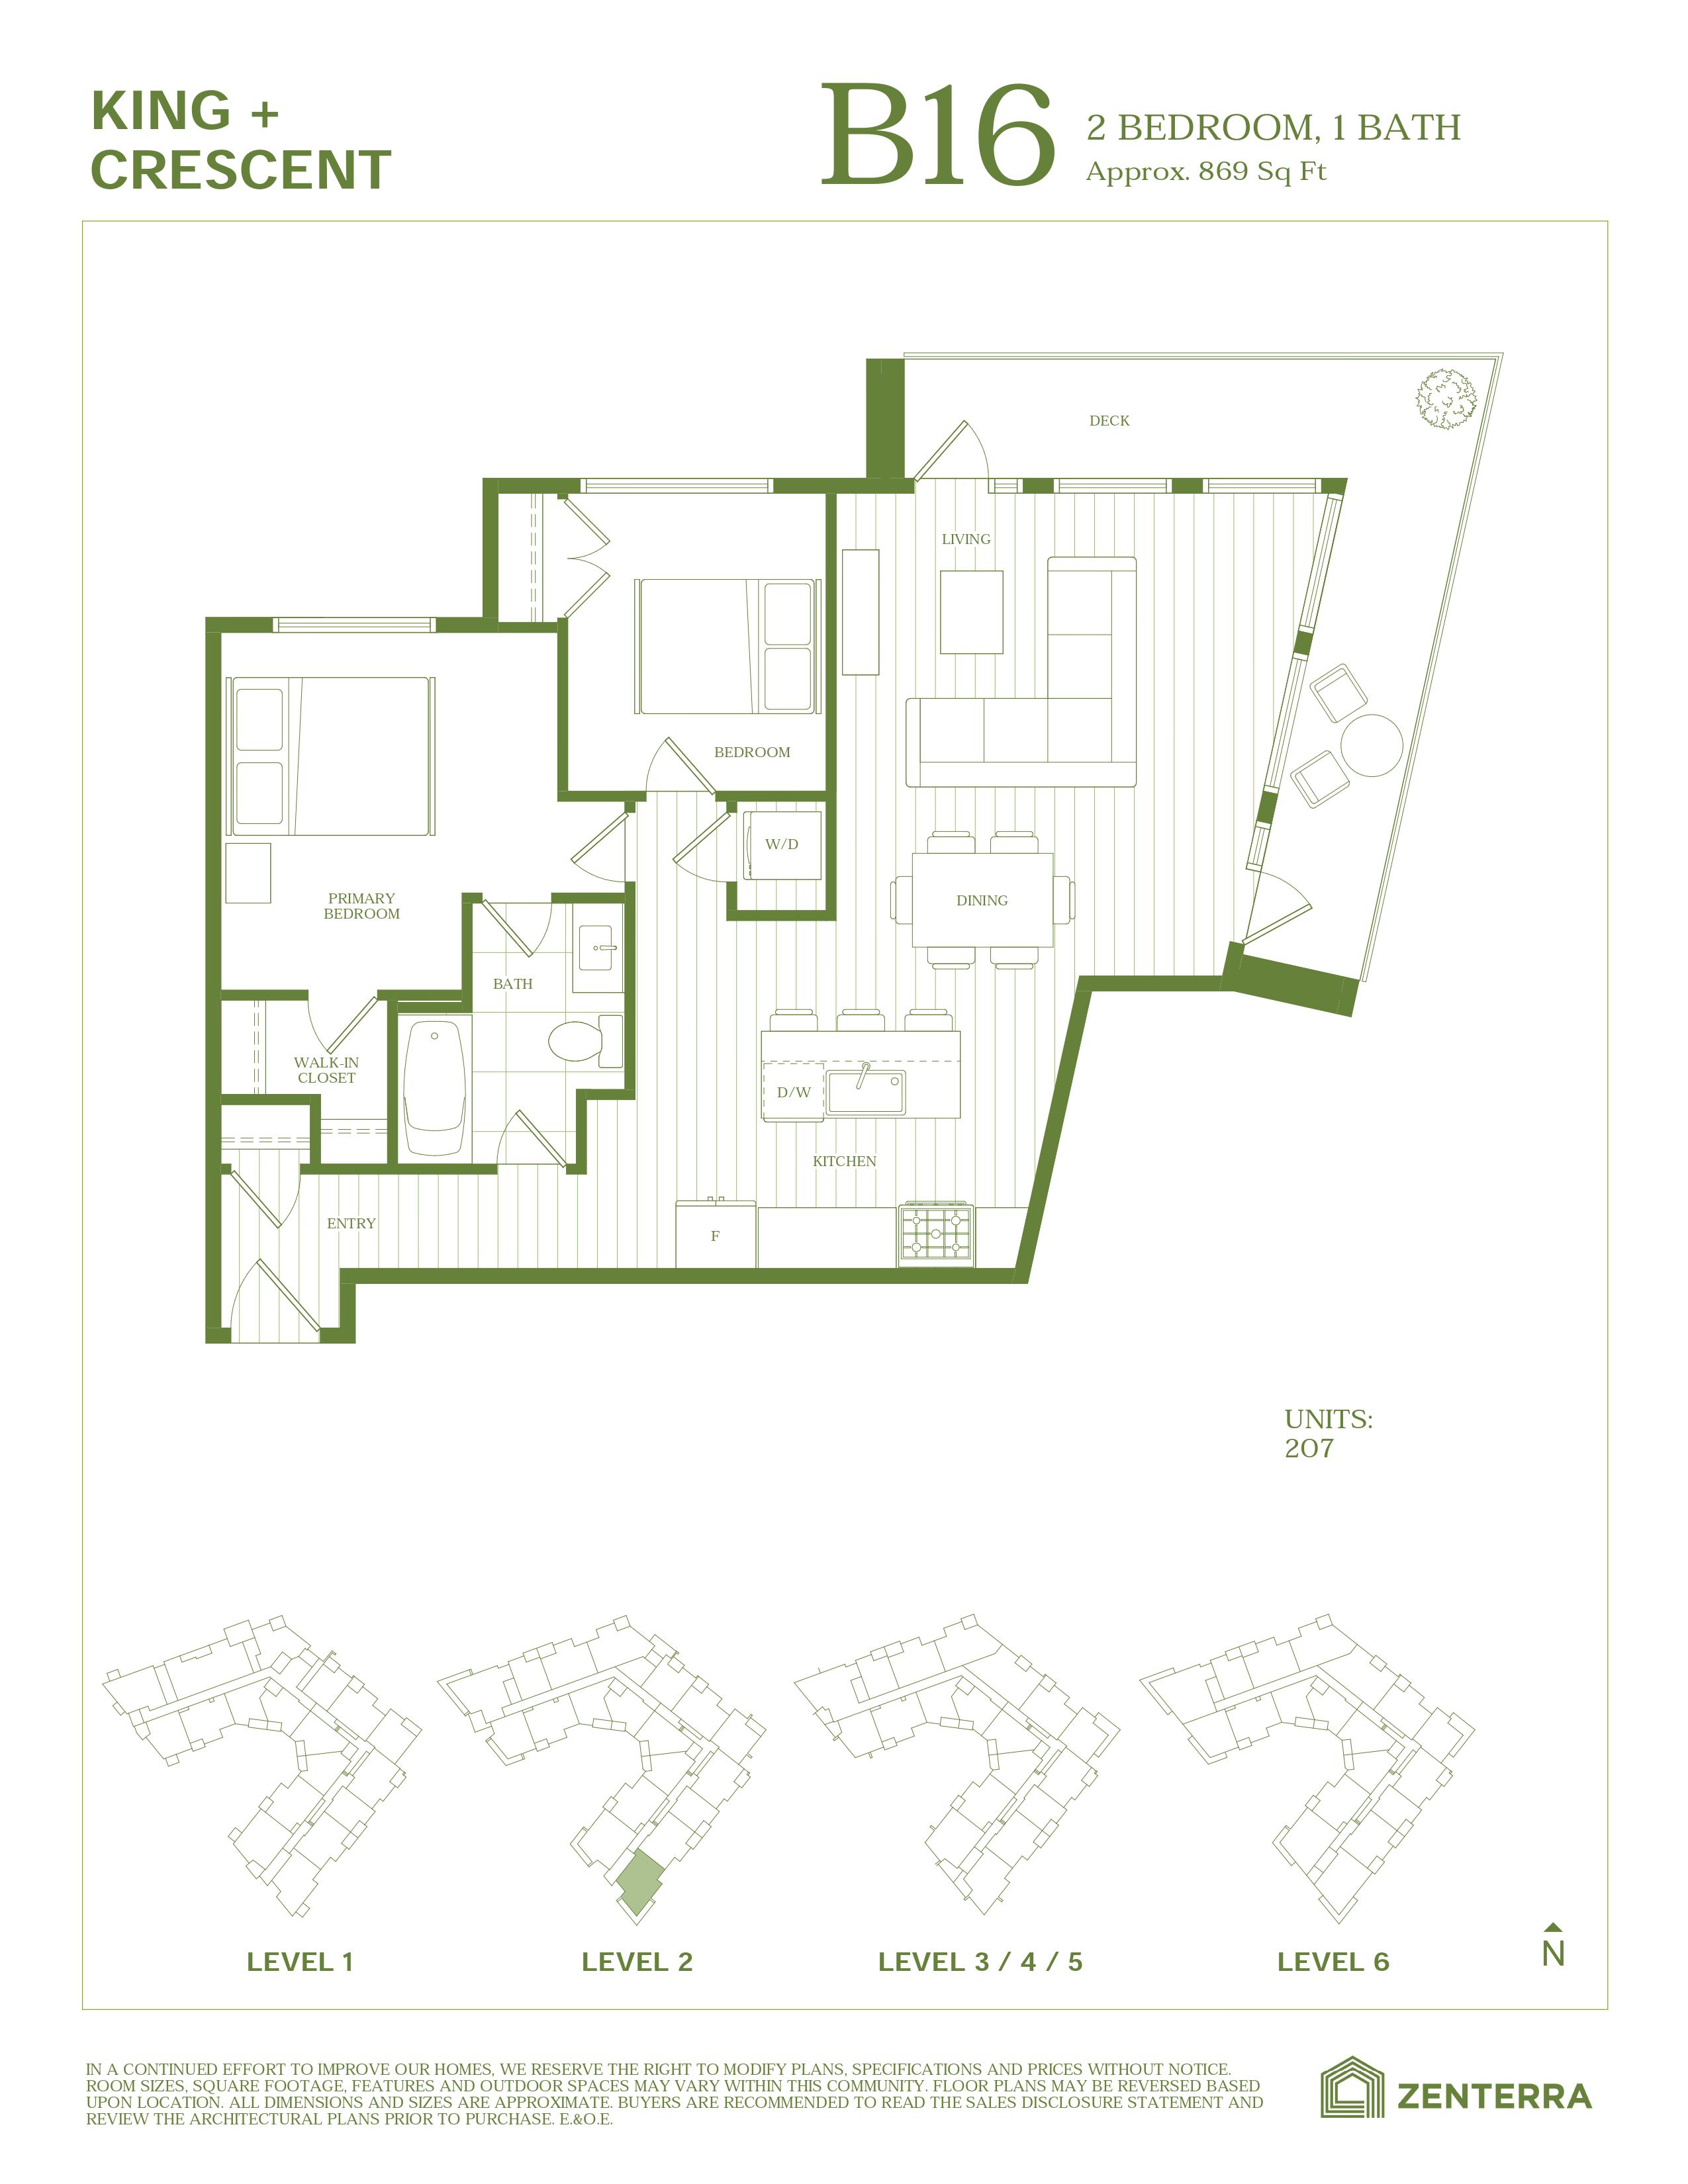 B16 Floor Plan of King + Crescent Condos with undefined beds